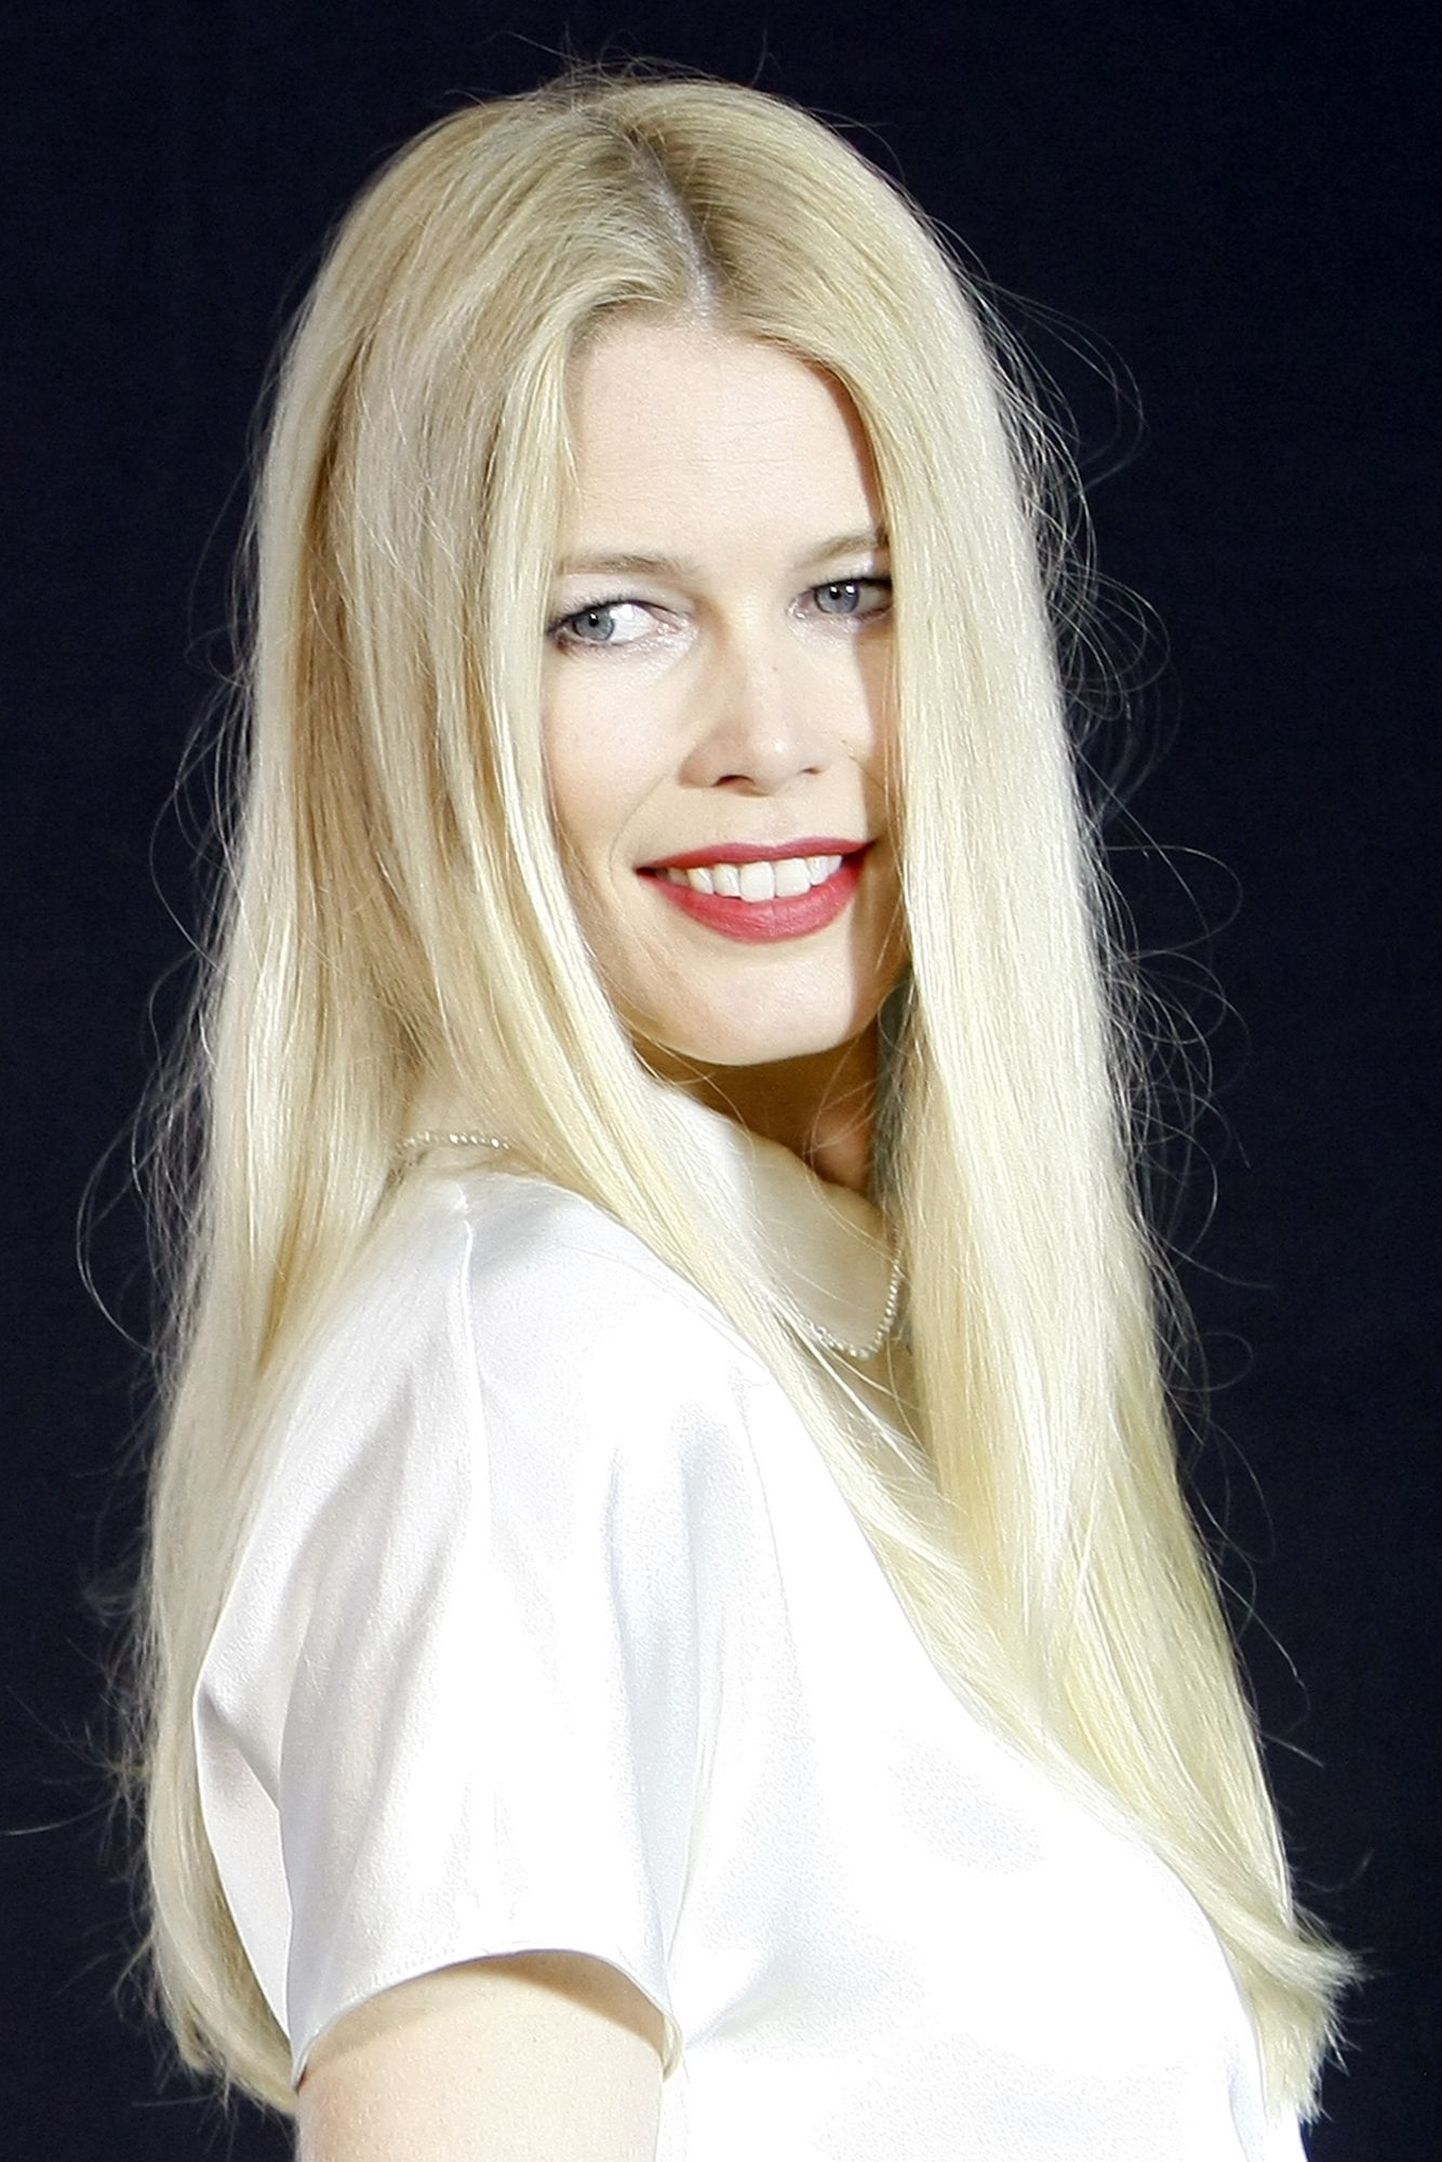 Claudia Schiffer is seen prior to the presentation of Chanel's Fall-Winter 2009-2010 ready-to-wear collection, Tuesday, March 10, 2009 in Paris. (AP Photo/Thibault Camus) / SCANPIX Code: 436